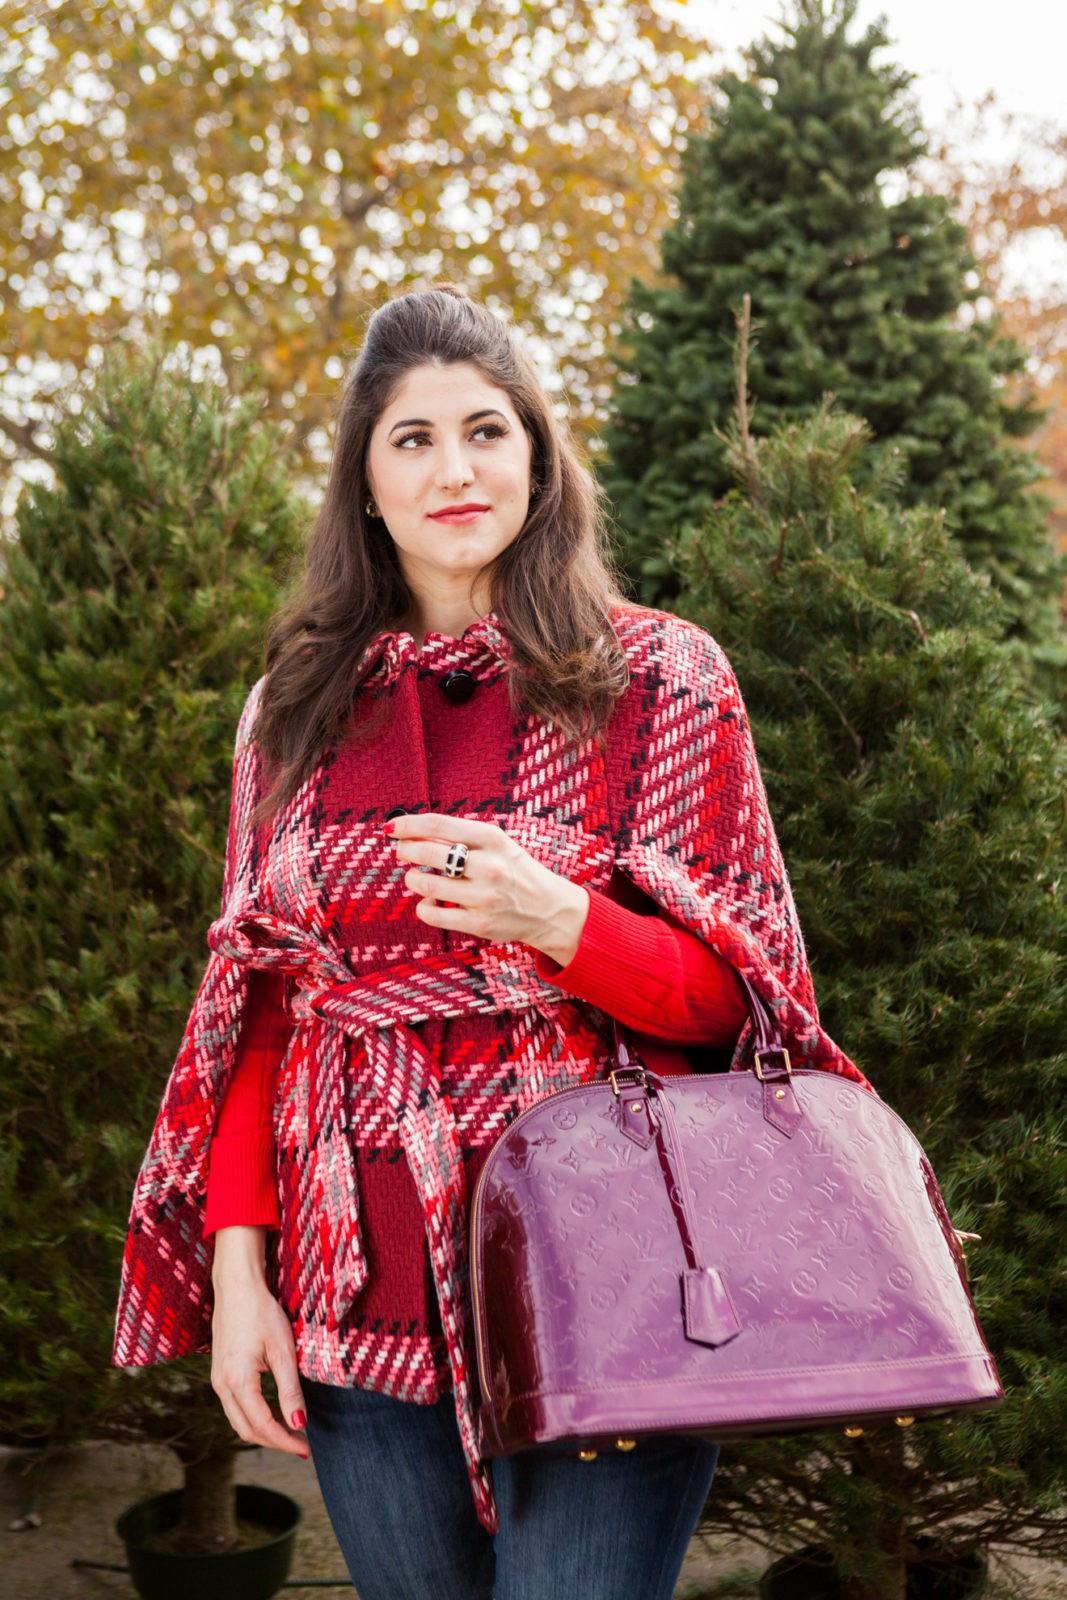 Kate Spade Plaid Cape, 12 Days of Holiday Style by Los Angeles Fashion Blogger Laura Lily,